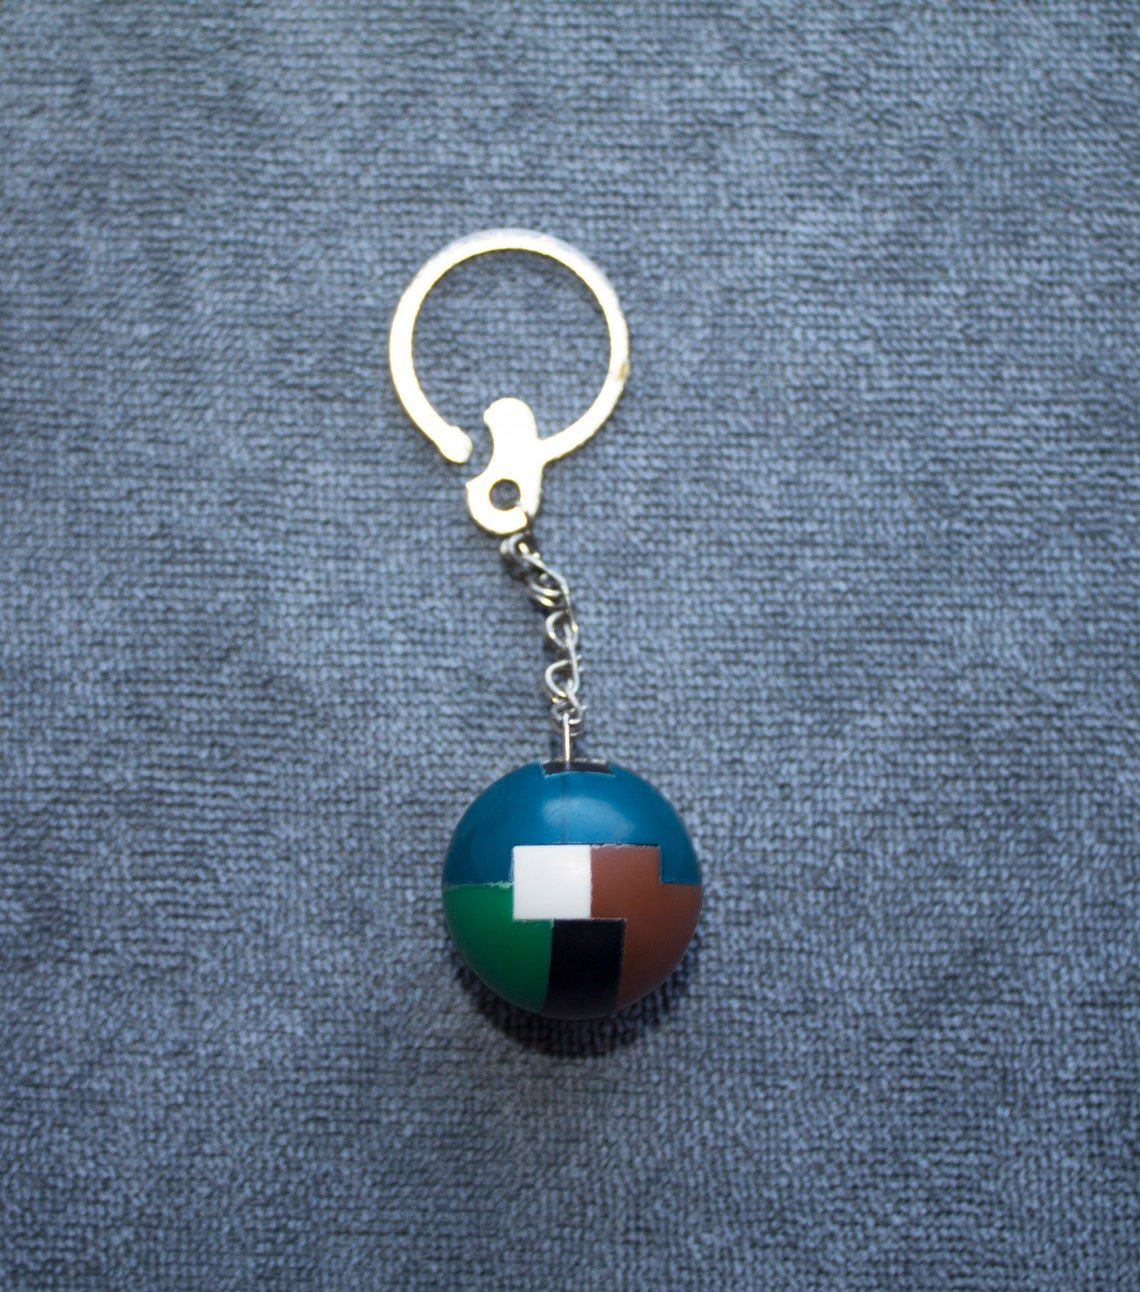 Vintage souvenir keychain with a secret. Made in the USSR. 1978. otk 224.